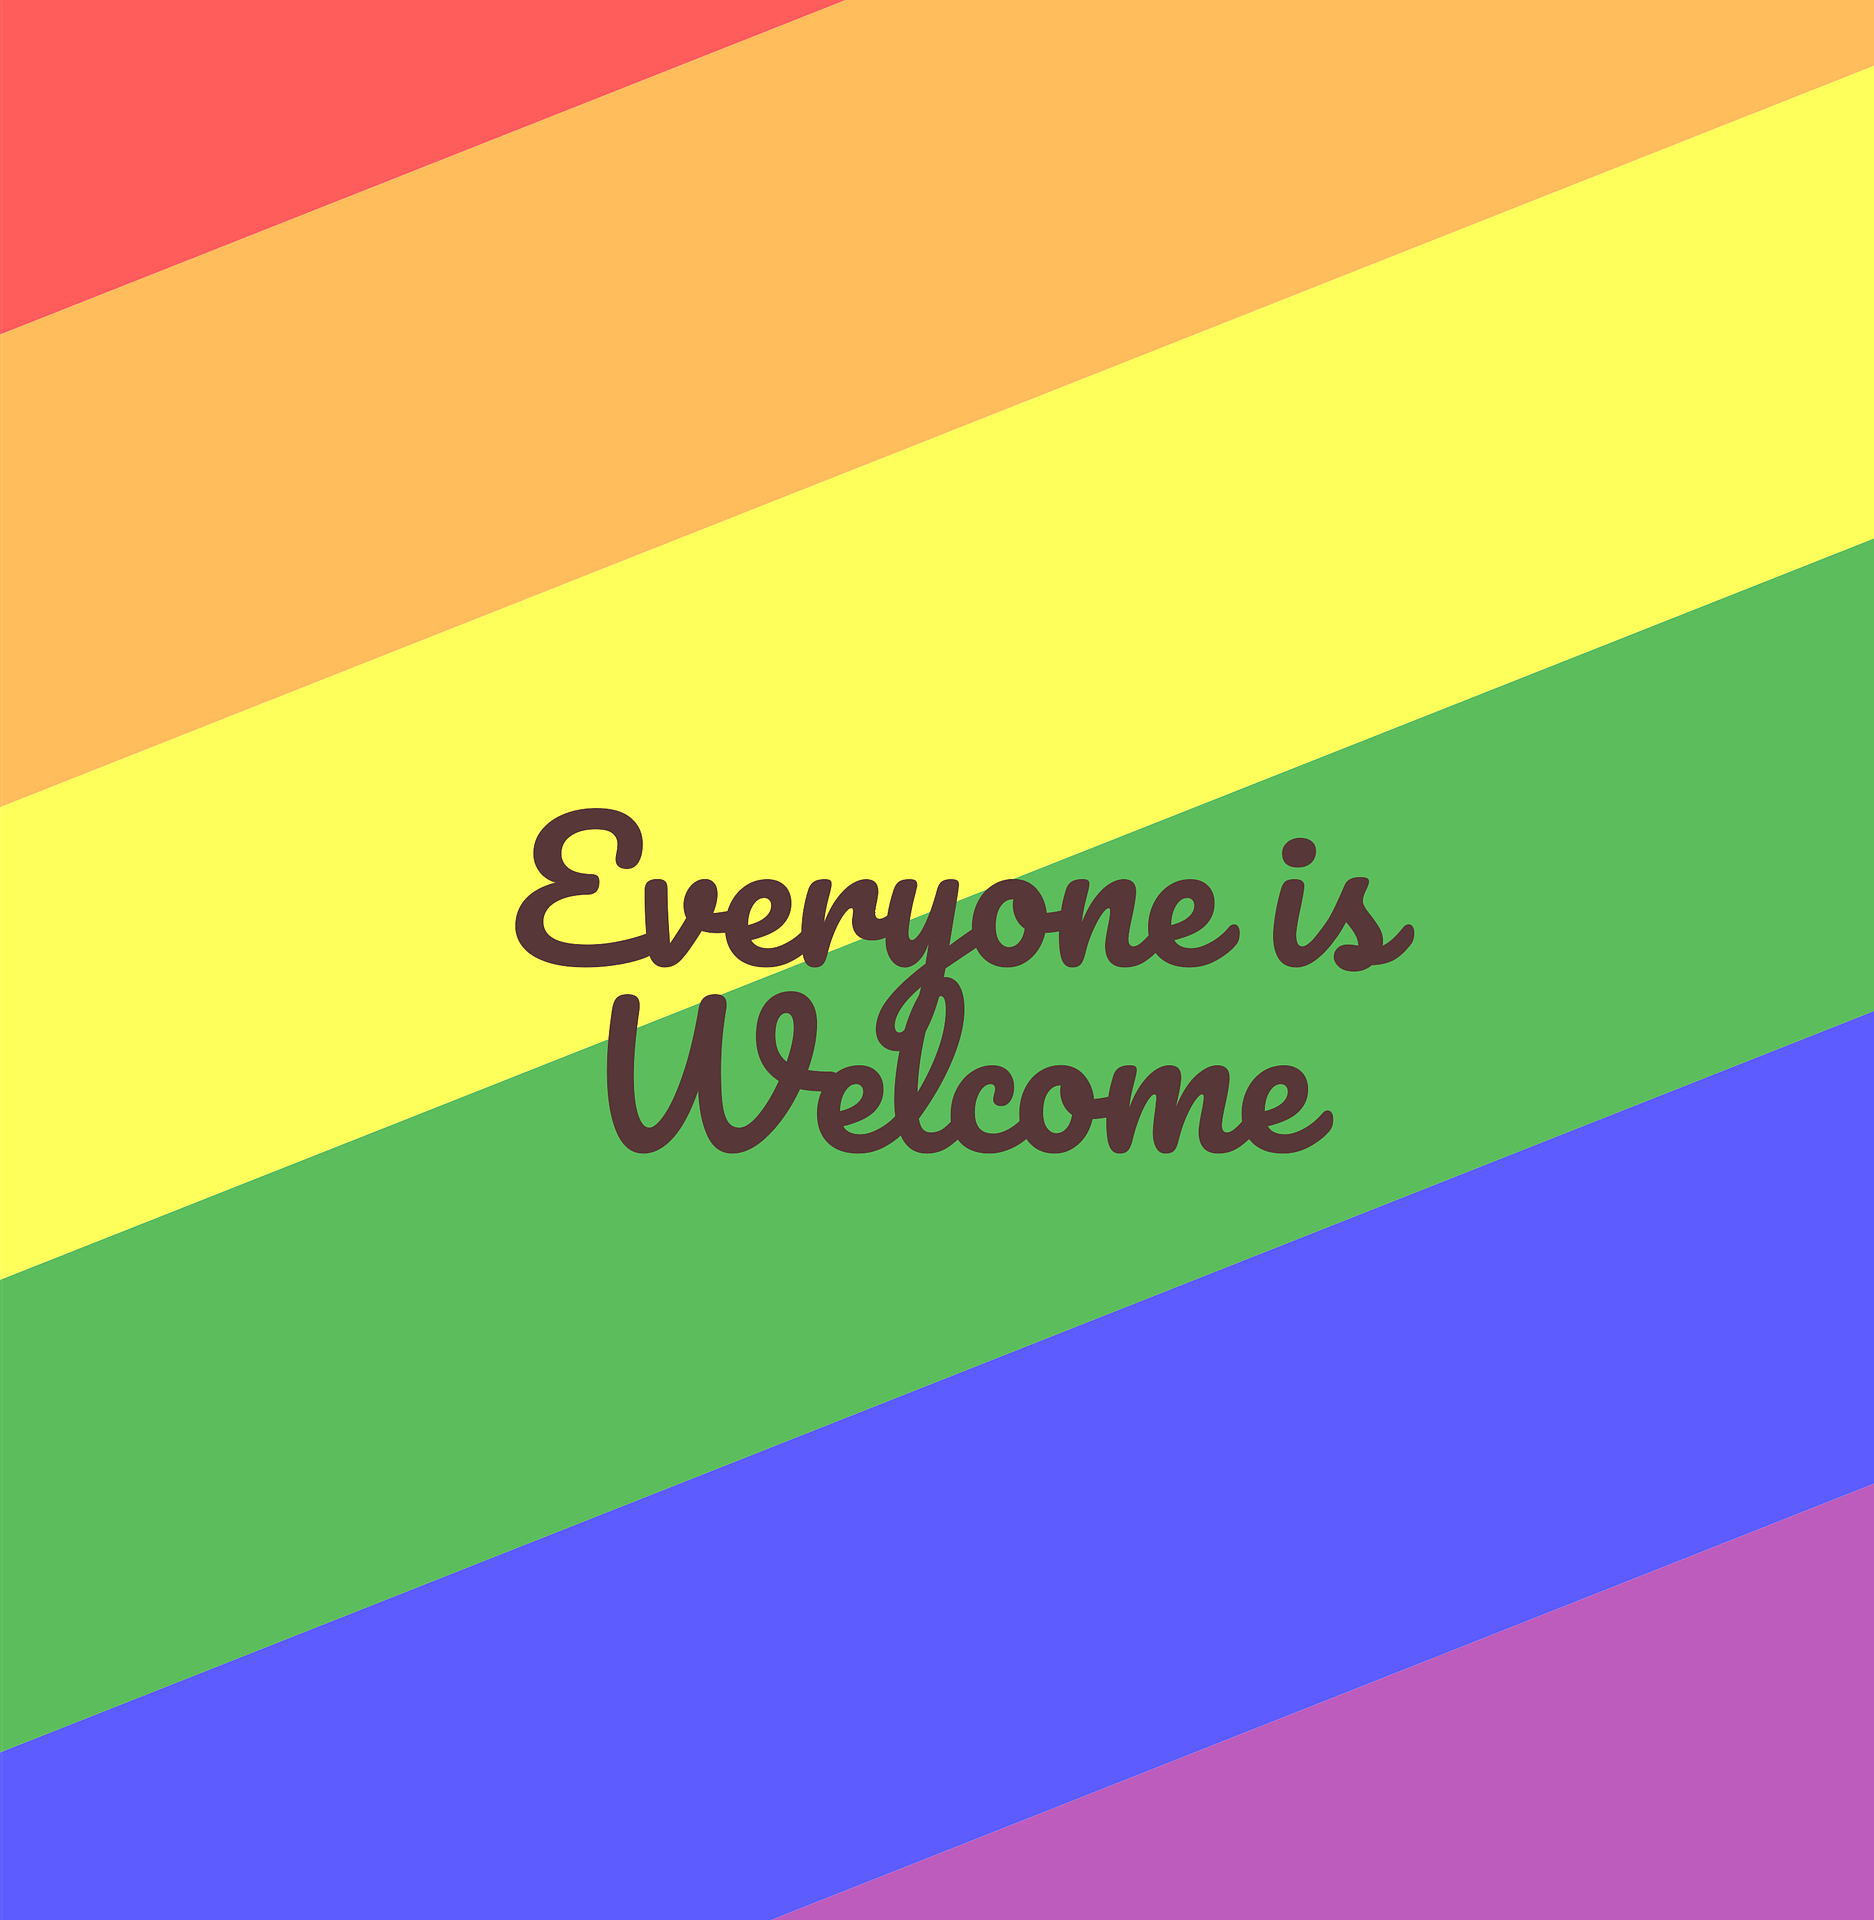 Rainbow with text that says "Everyone is welcome."